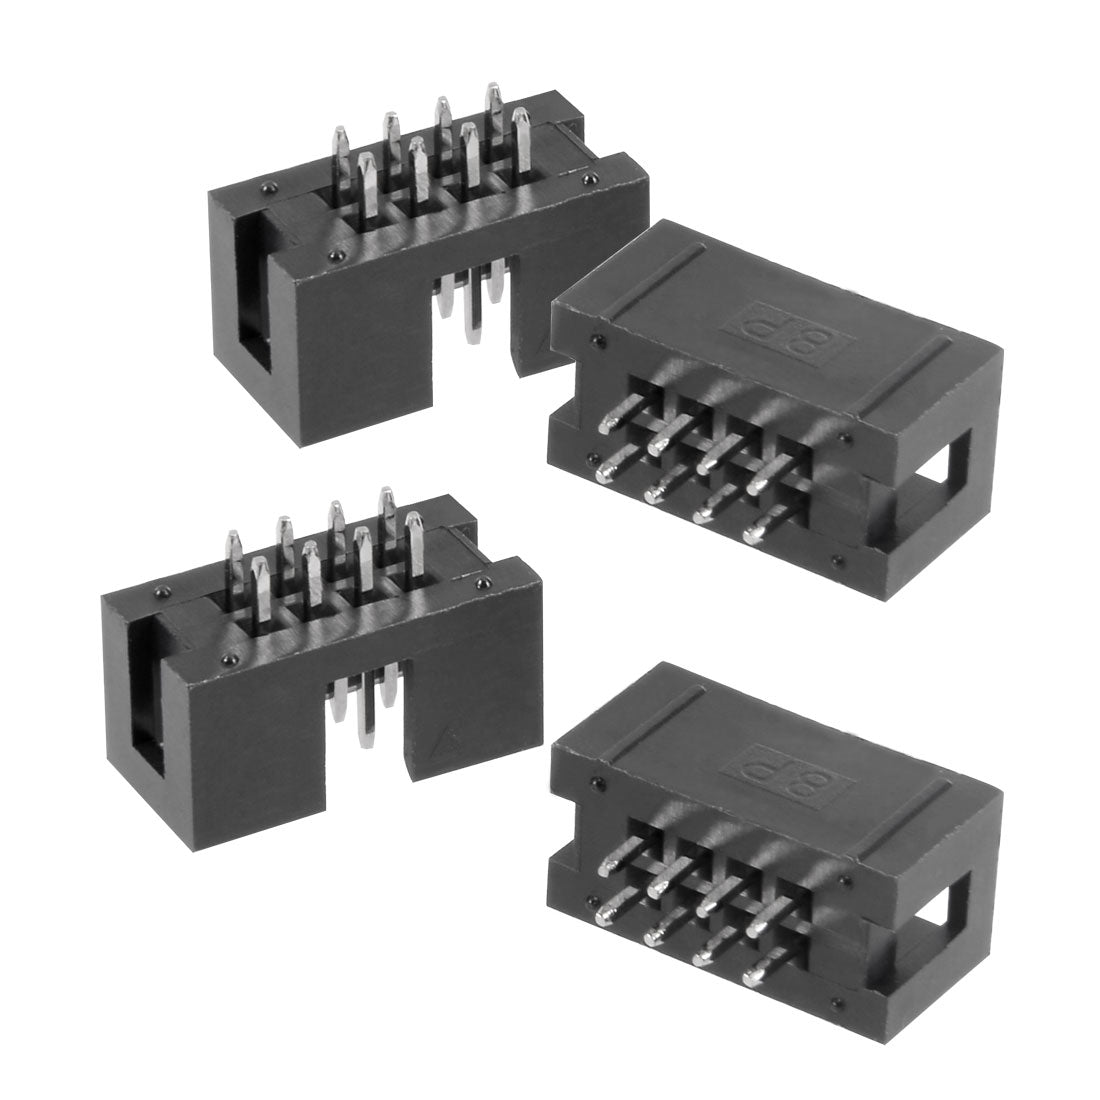 uxcell Uxcell 20Pcs 2.54mm Pitch 2x4-Pin Double Row Straight Box Header Connector PCB Board Socket